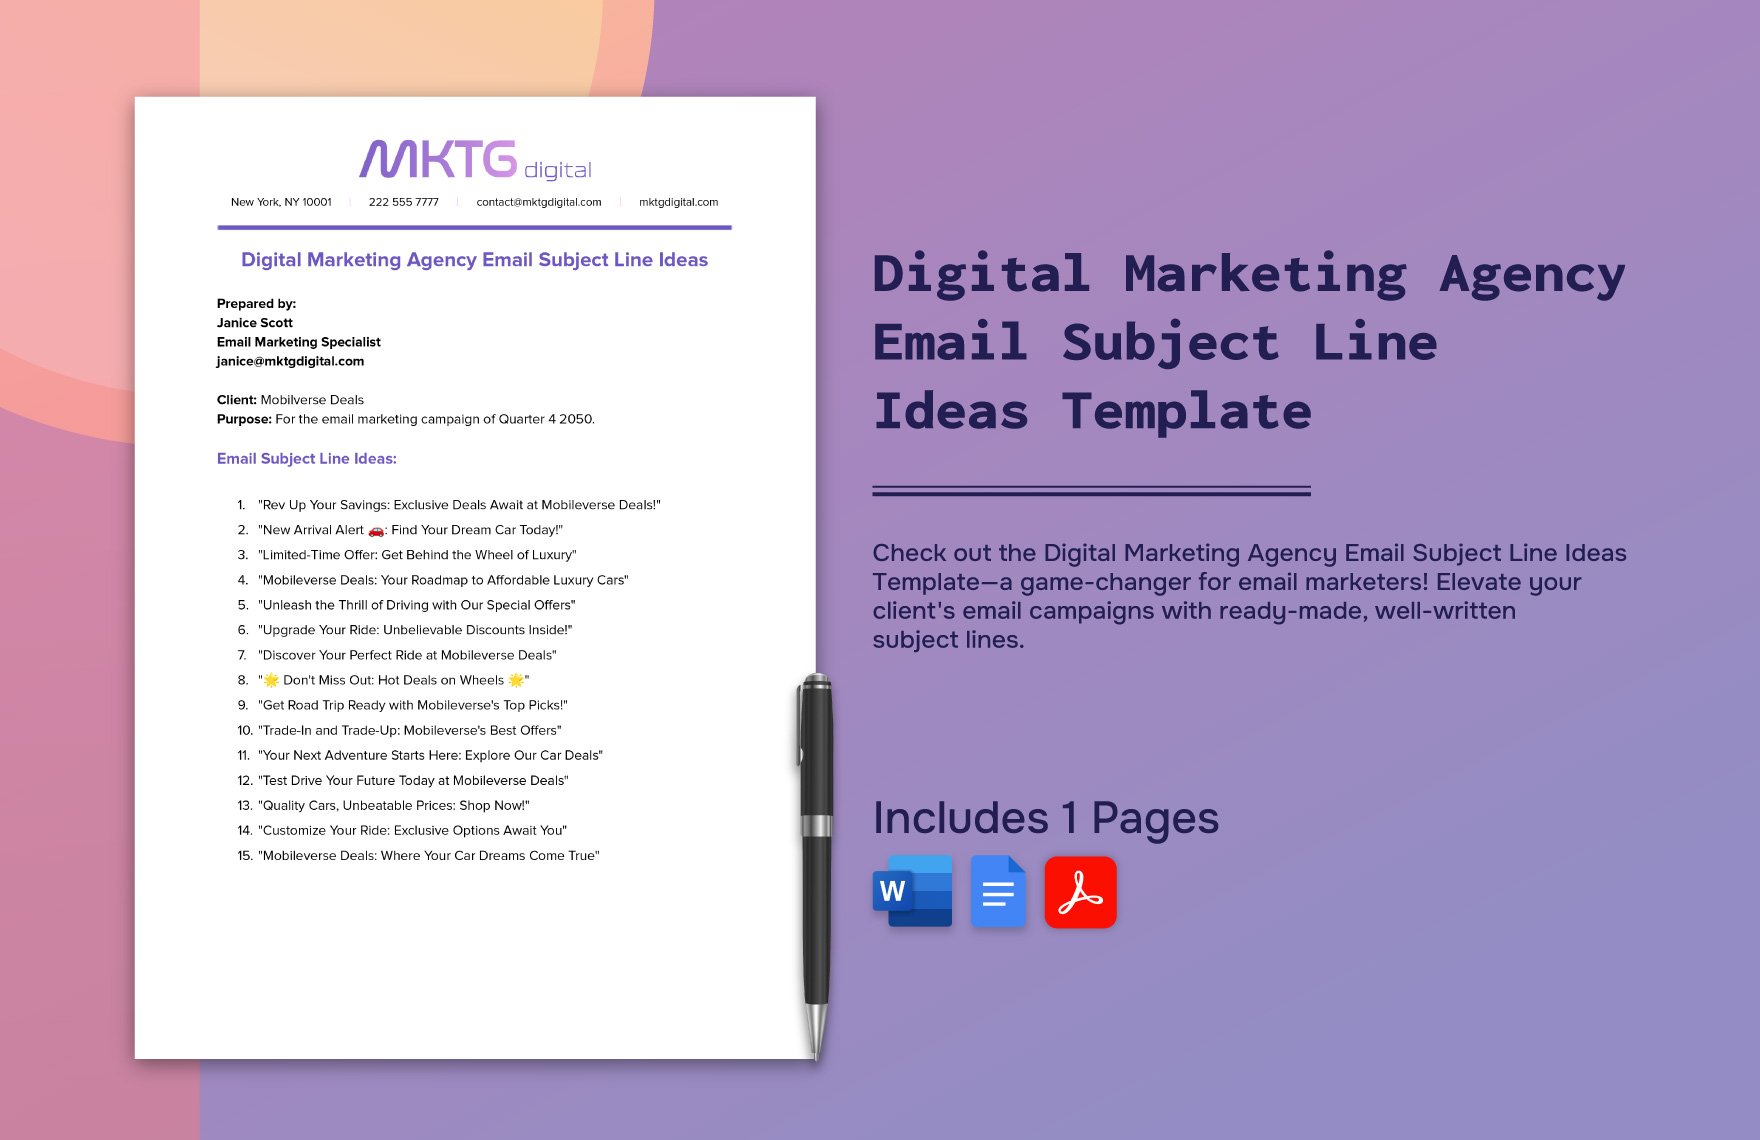 Digital Marketing Agency Email Subject Line Ideas Template